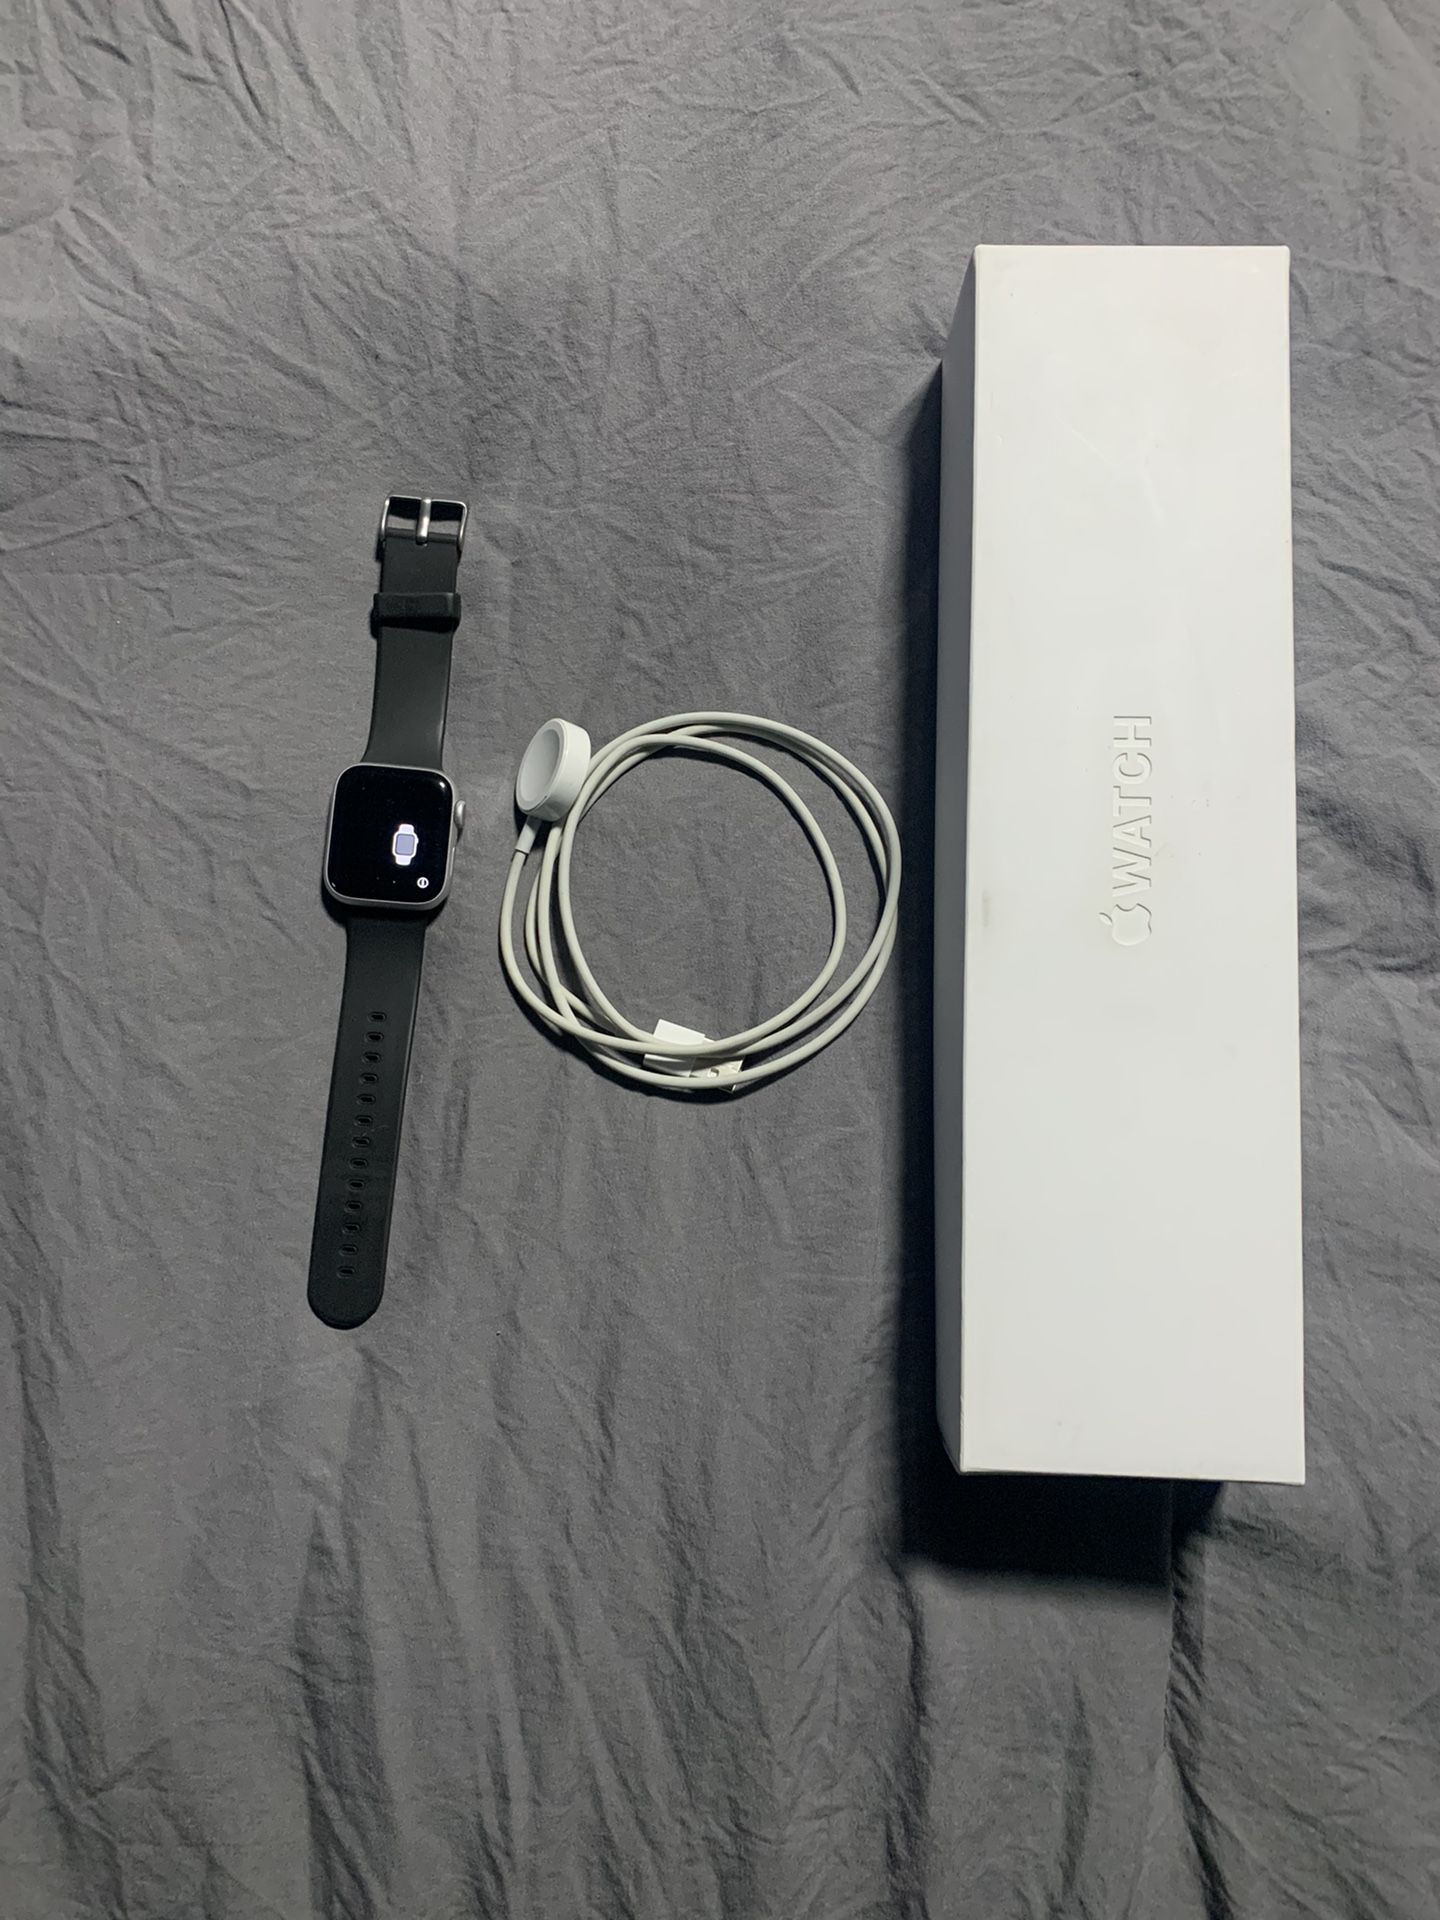 Apple watch series 4 - 40mm REDUCED PRICE TO SELL!